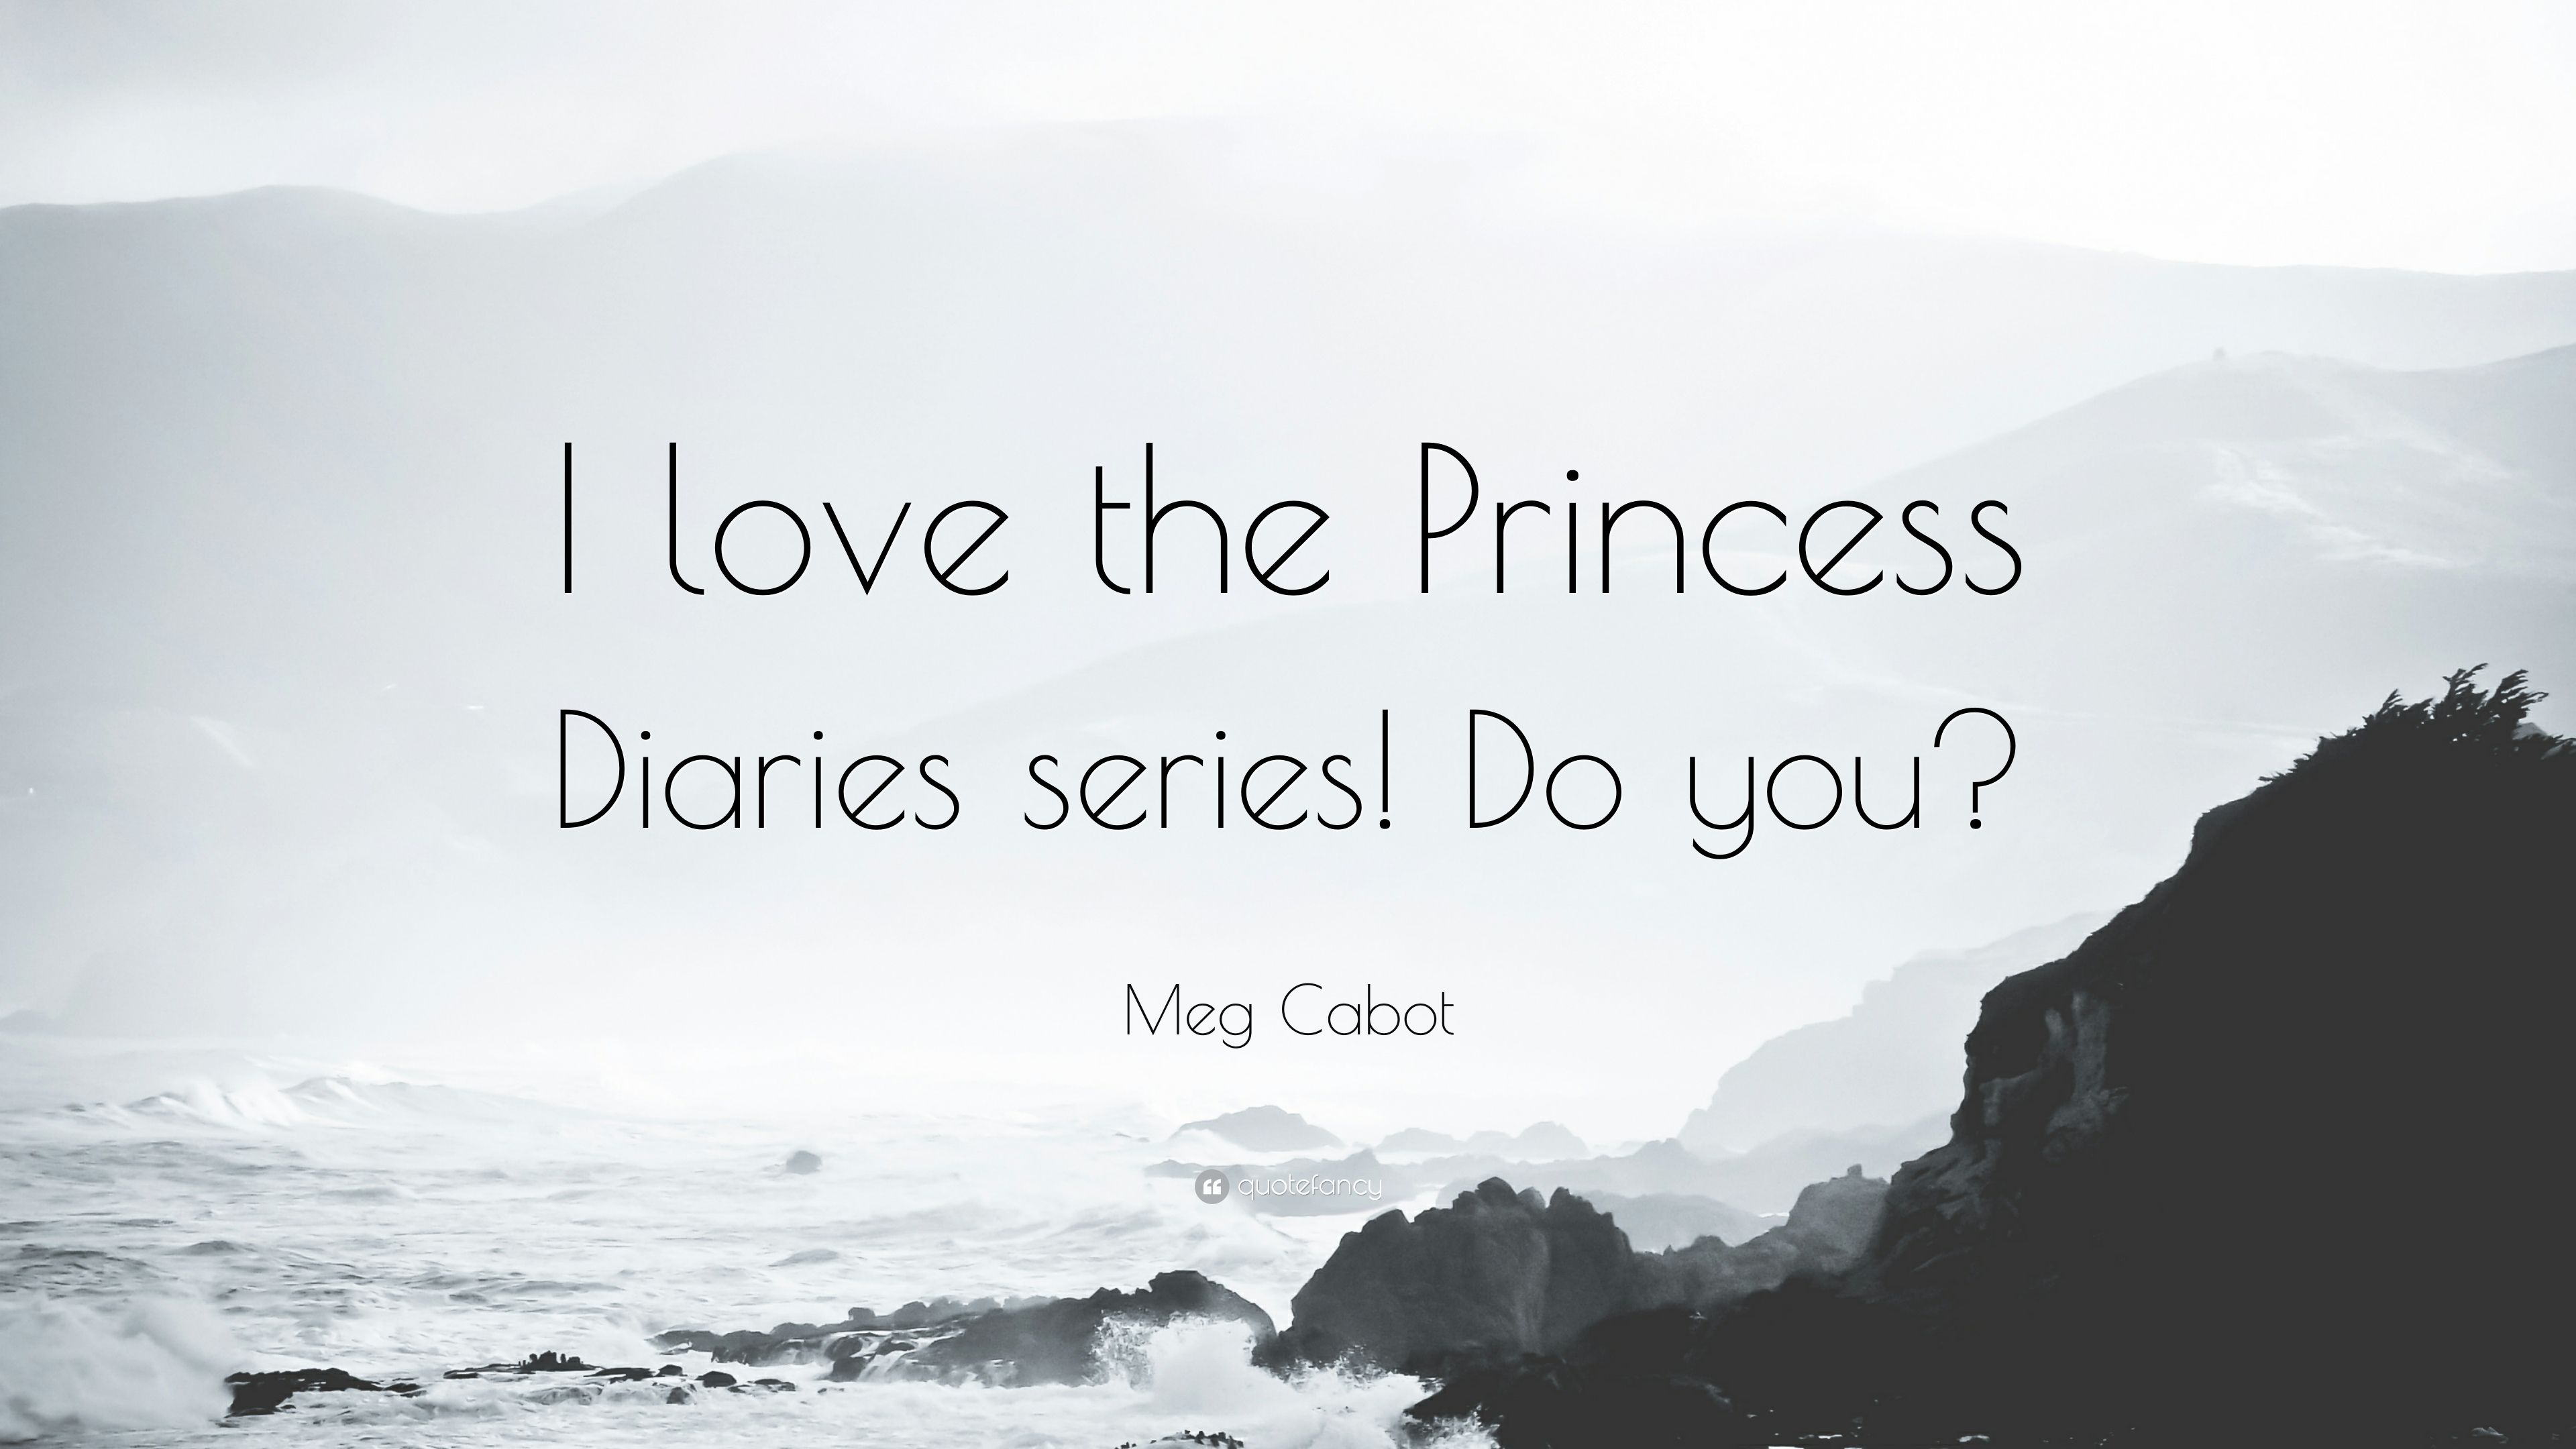 Meg Cabot Quote: “I love the Princess Diaries series! Do you?” (7 wallpaper)